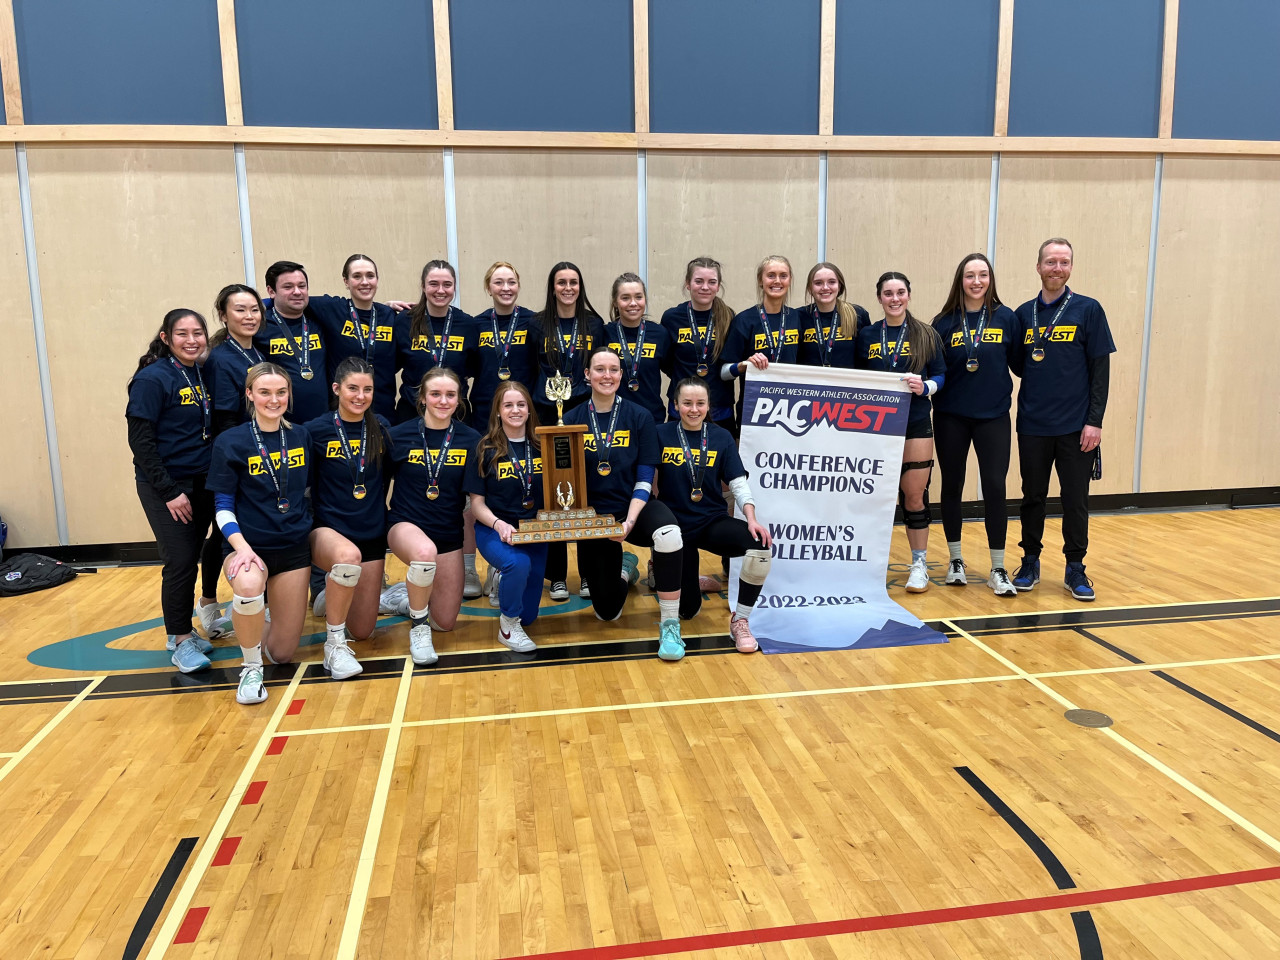 The Chargers women's volleyball team are PACWEST champs